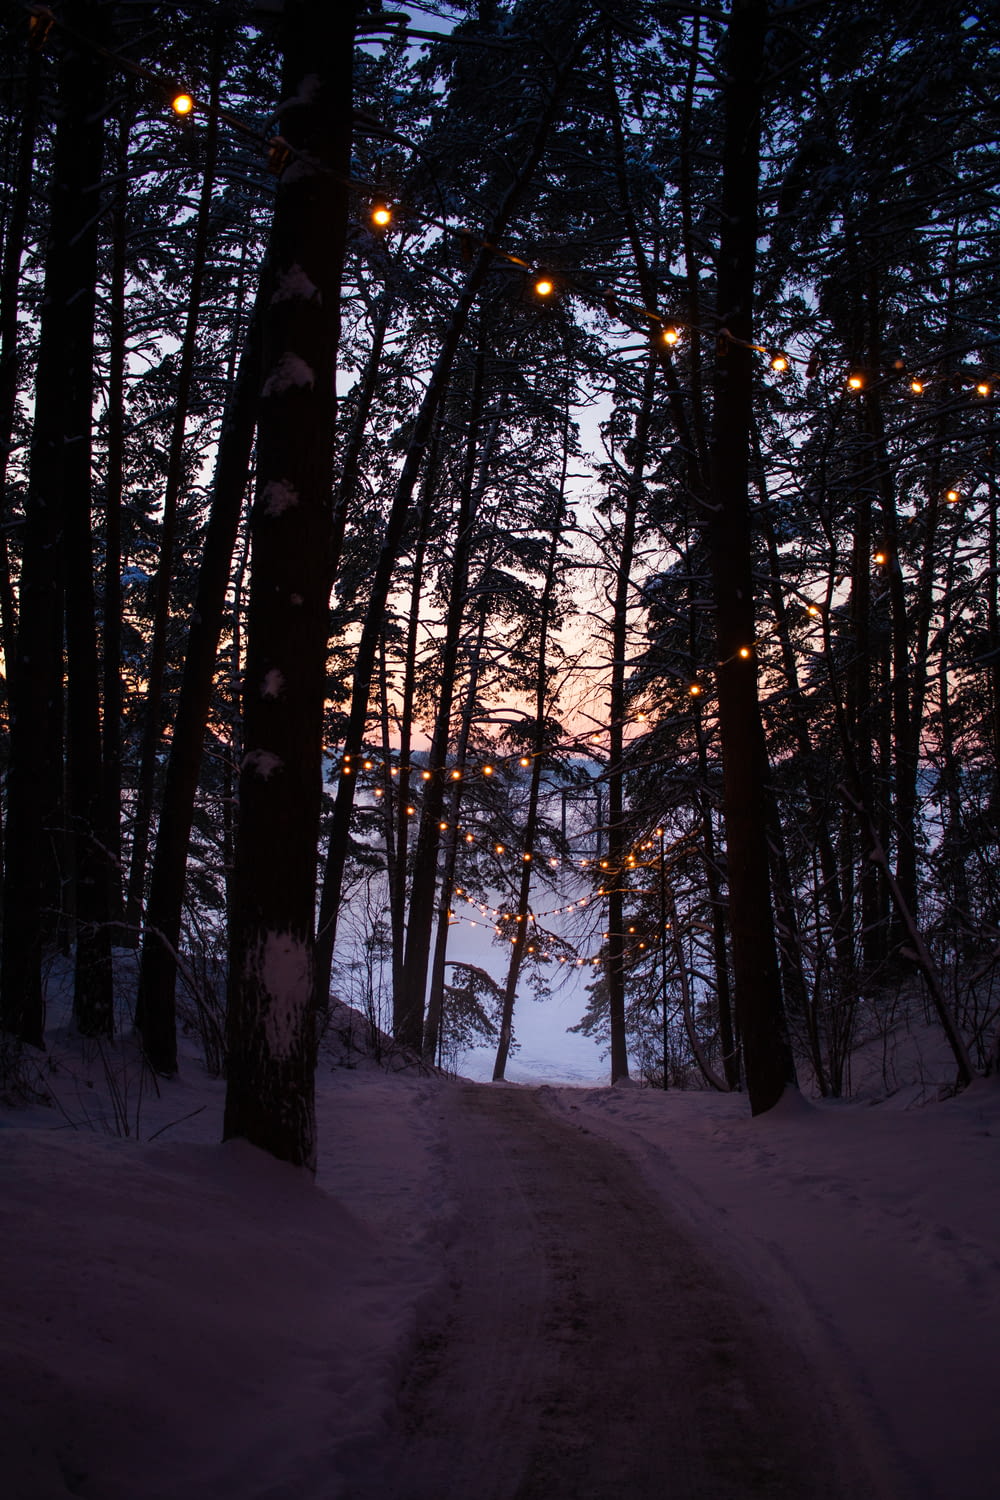 a path through a snowy forest with lights strung from the trees